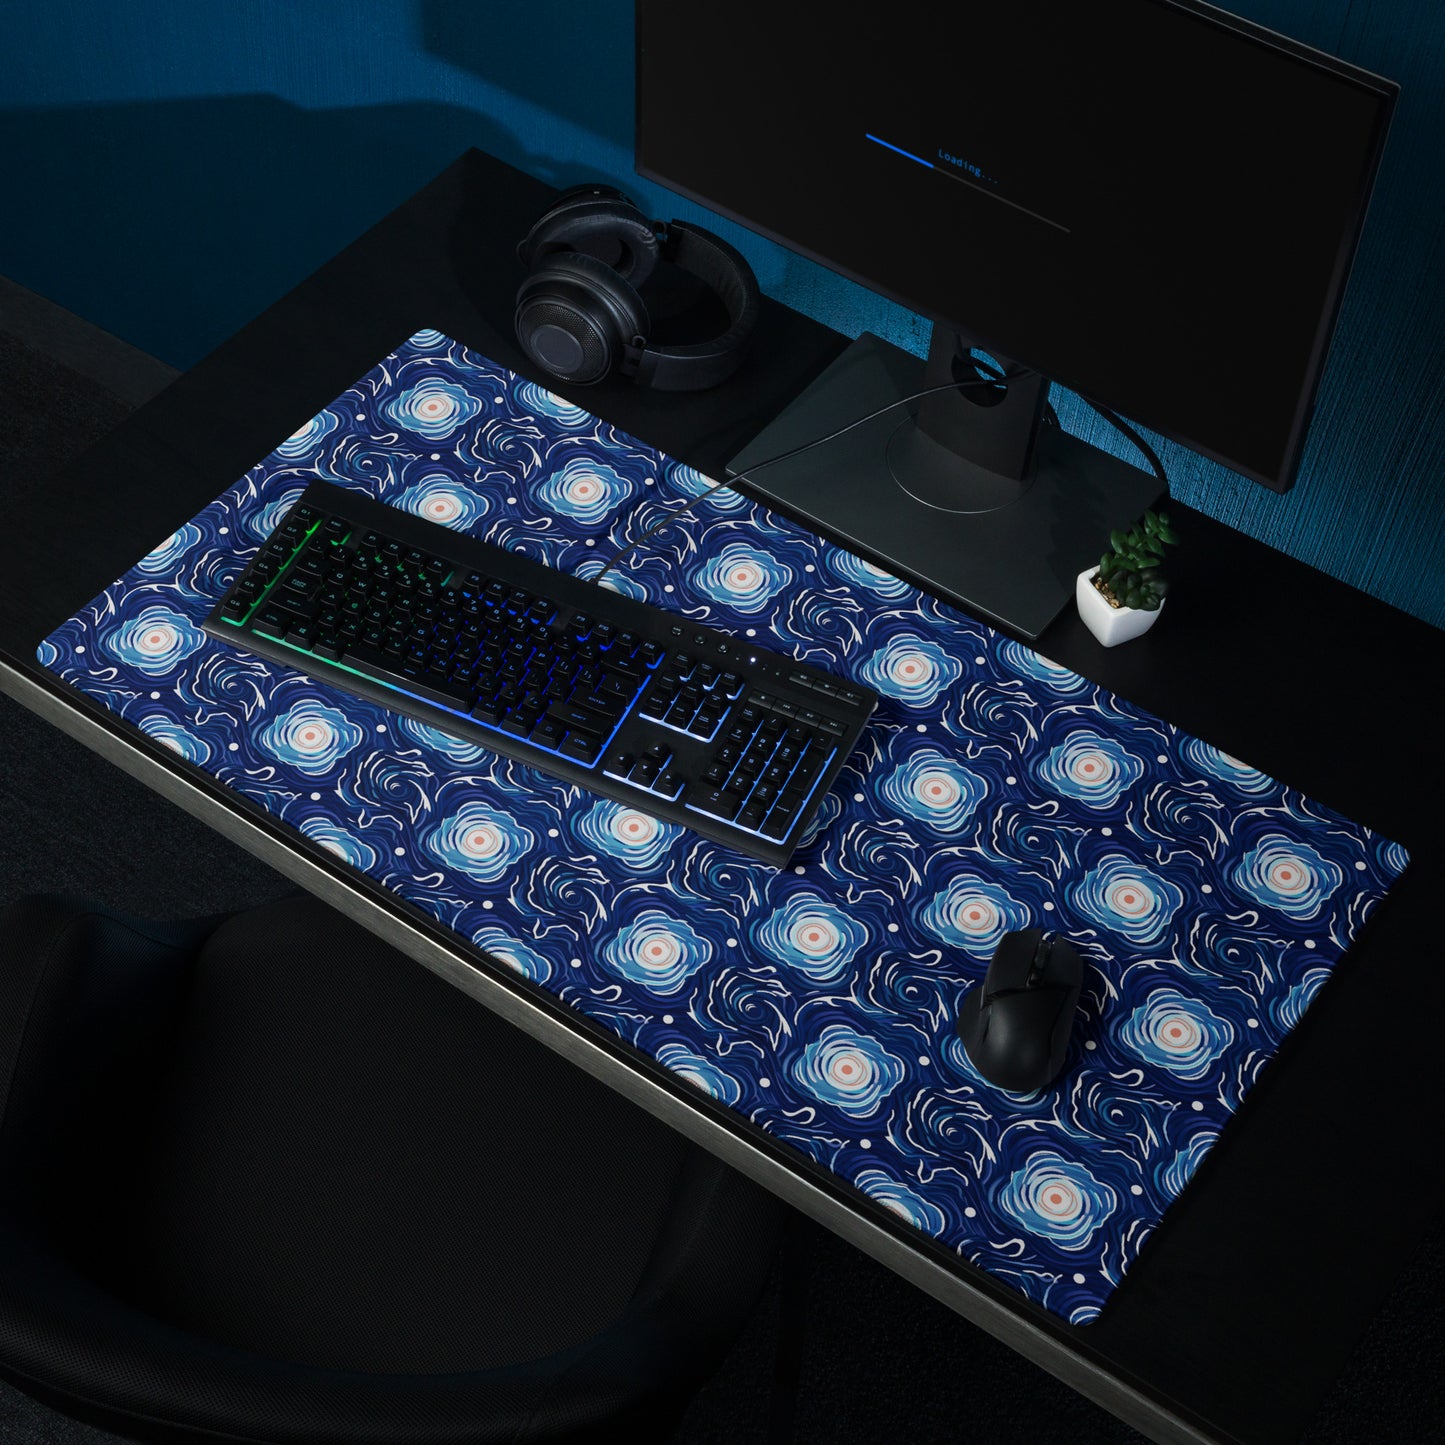 A 36" x 18" desk pad with a blue and white floral pattern sitting on a desk.